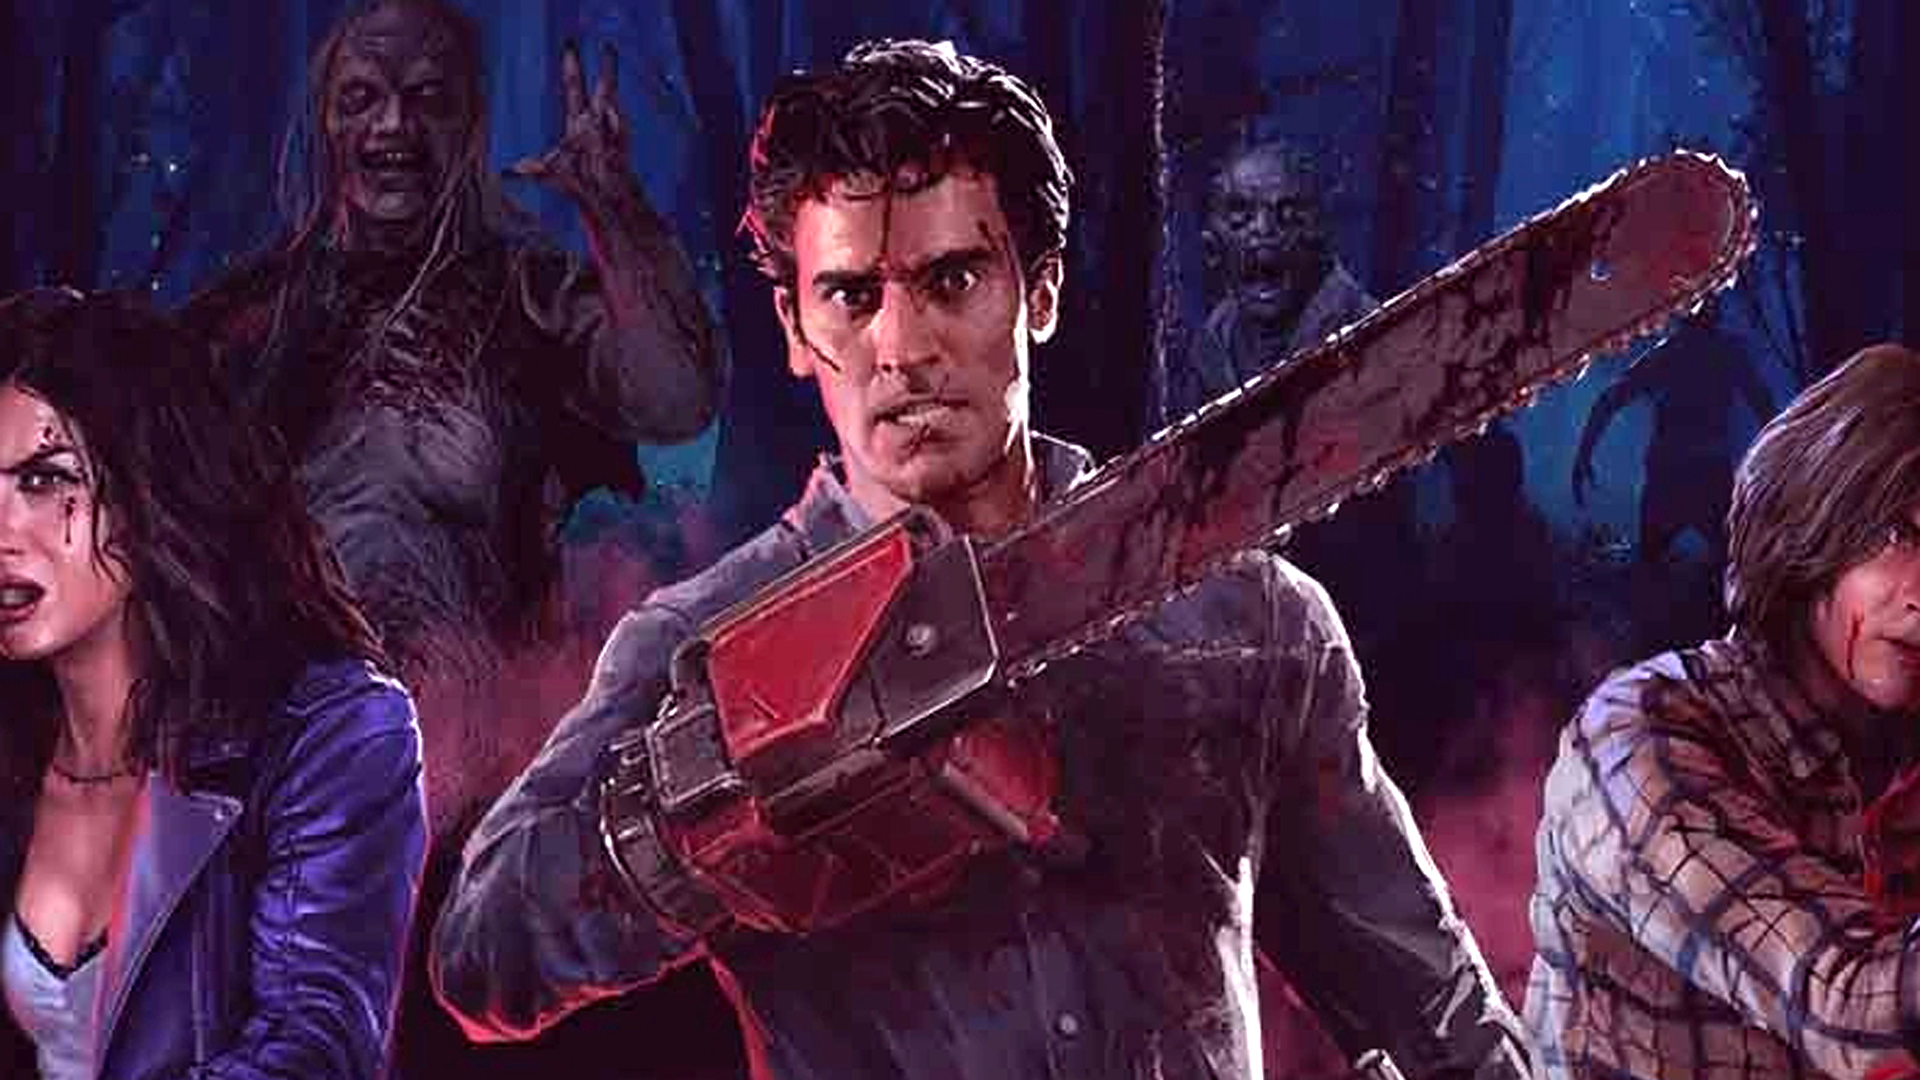 Evil Dead: The Game pits 40 players against each other in its new